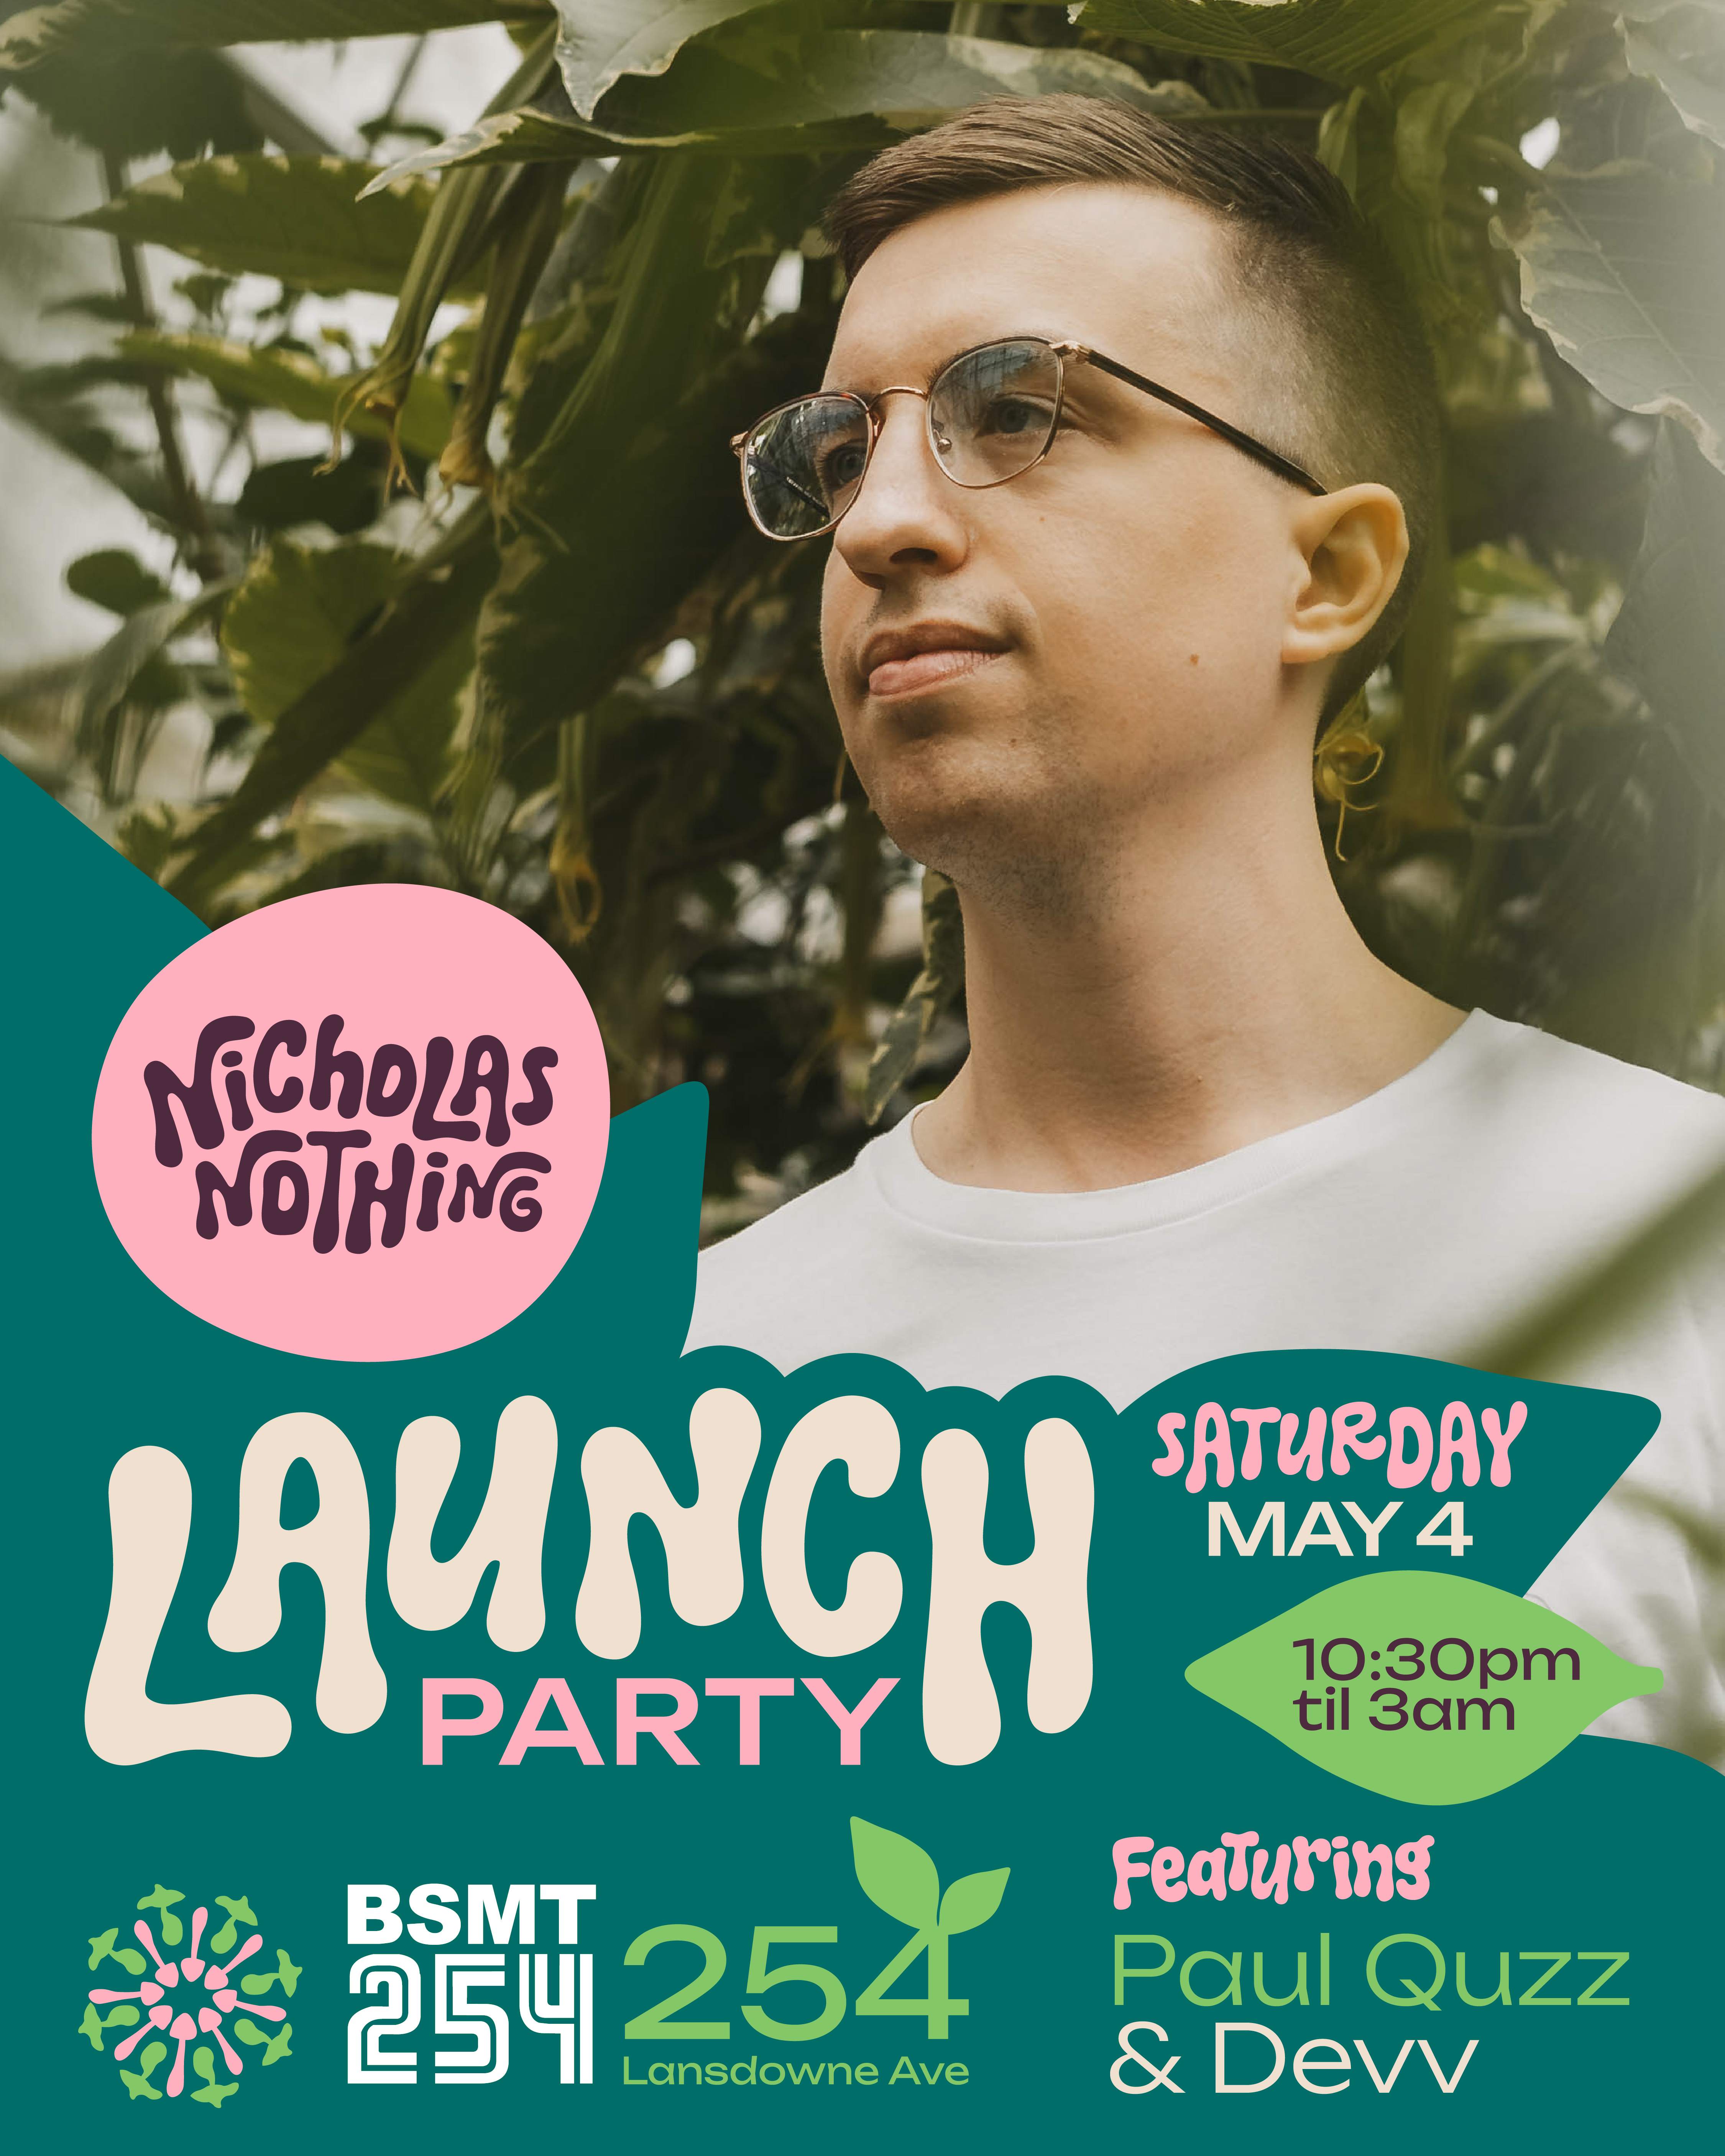 Nicholas Nothing Launch Party - フライヤー裏